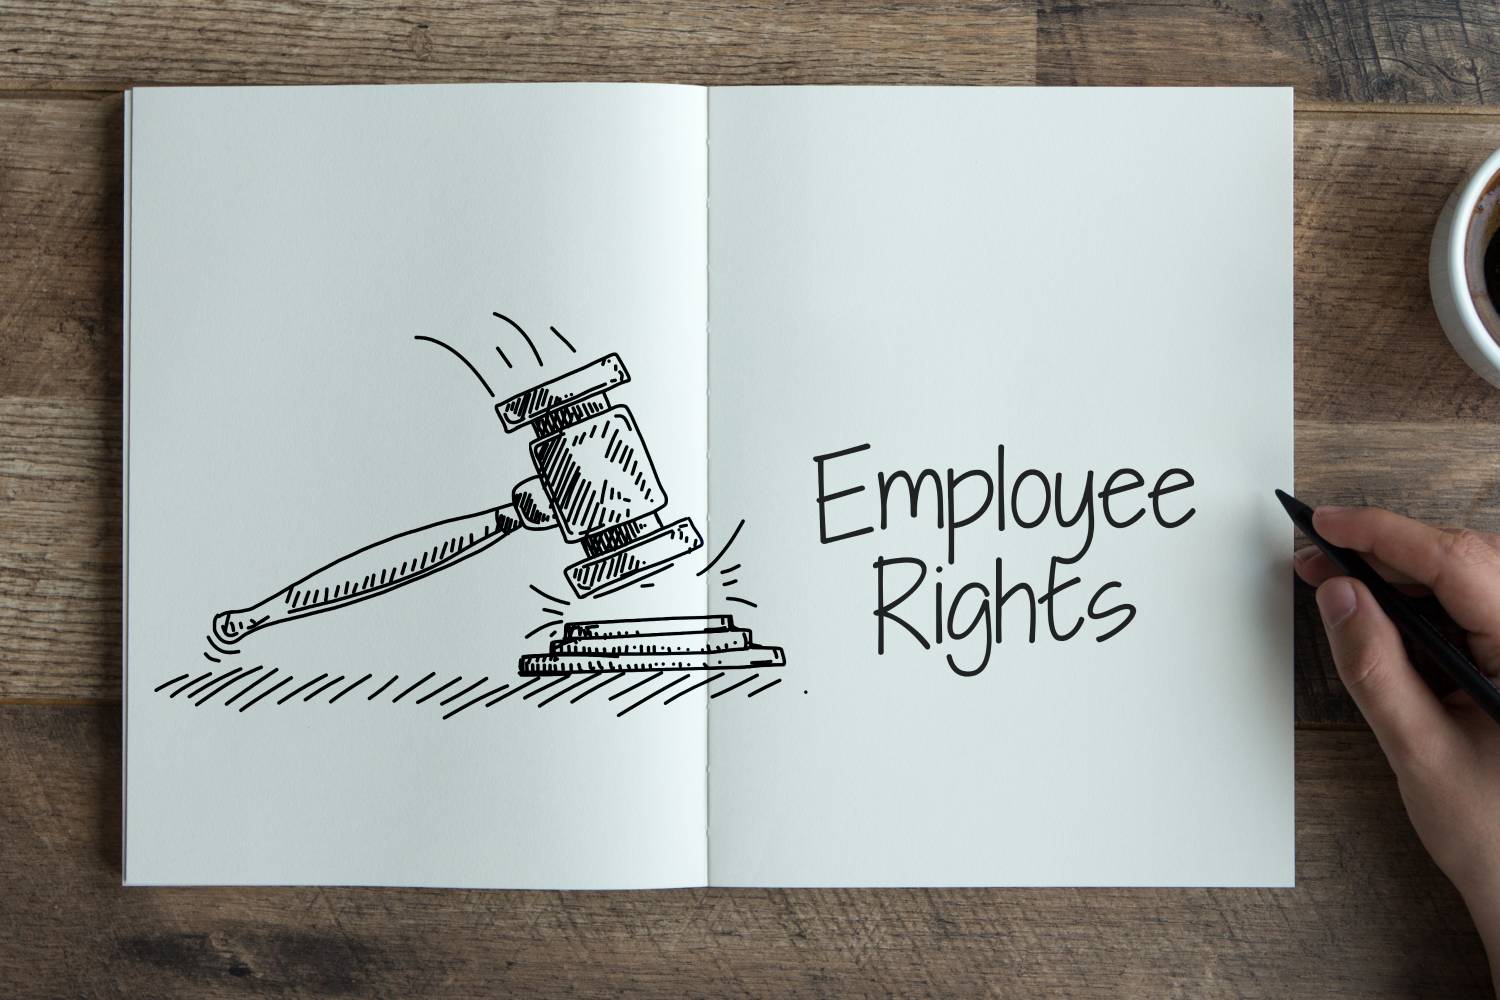 What Are My Rights As An Employee?